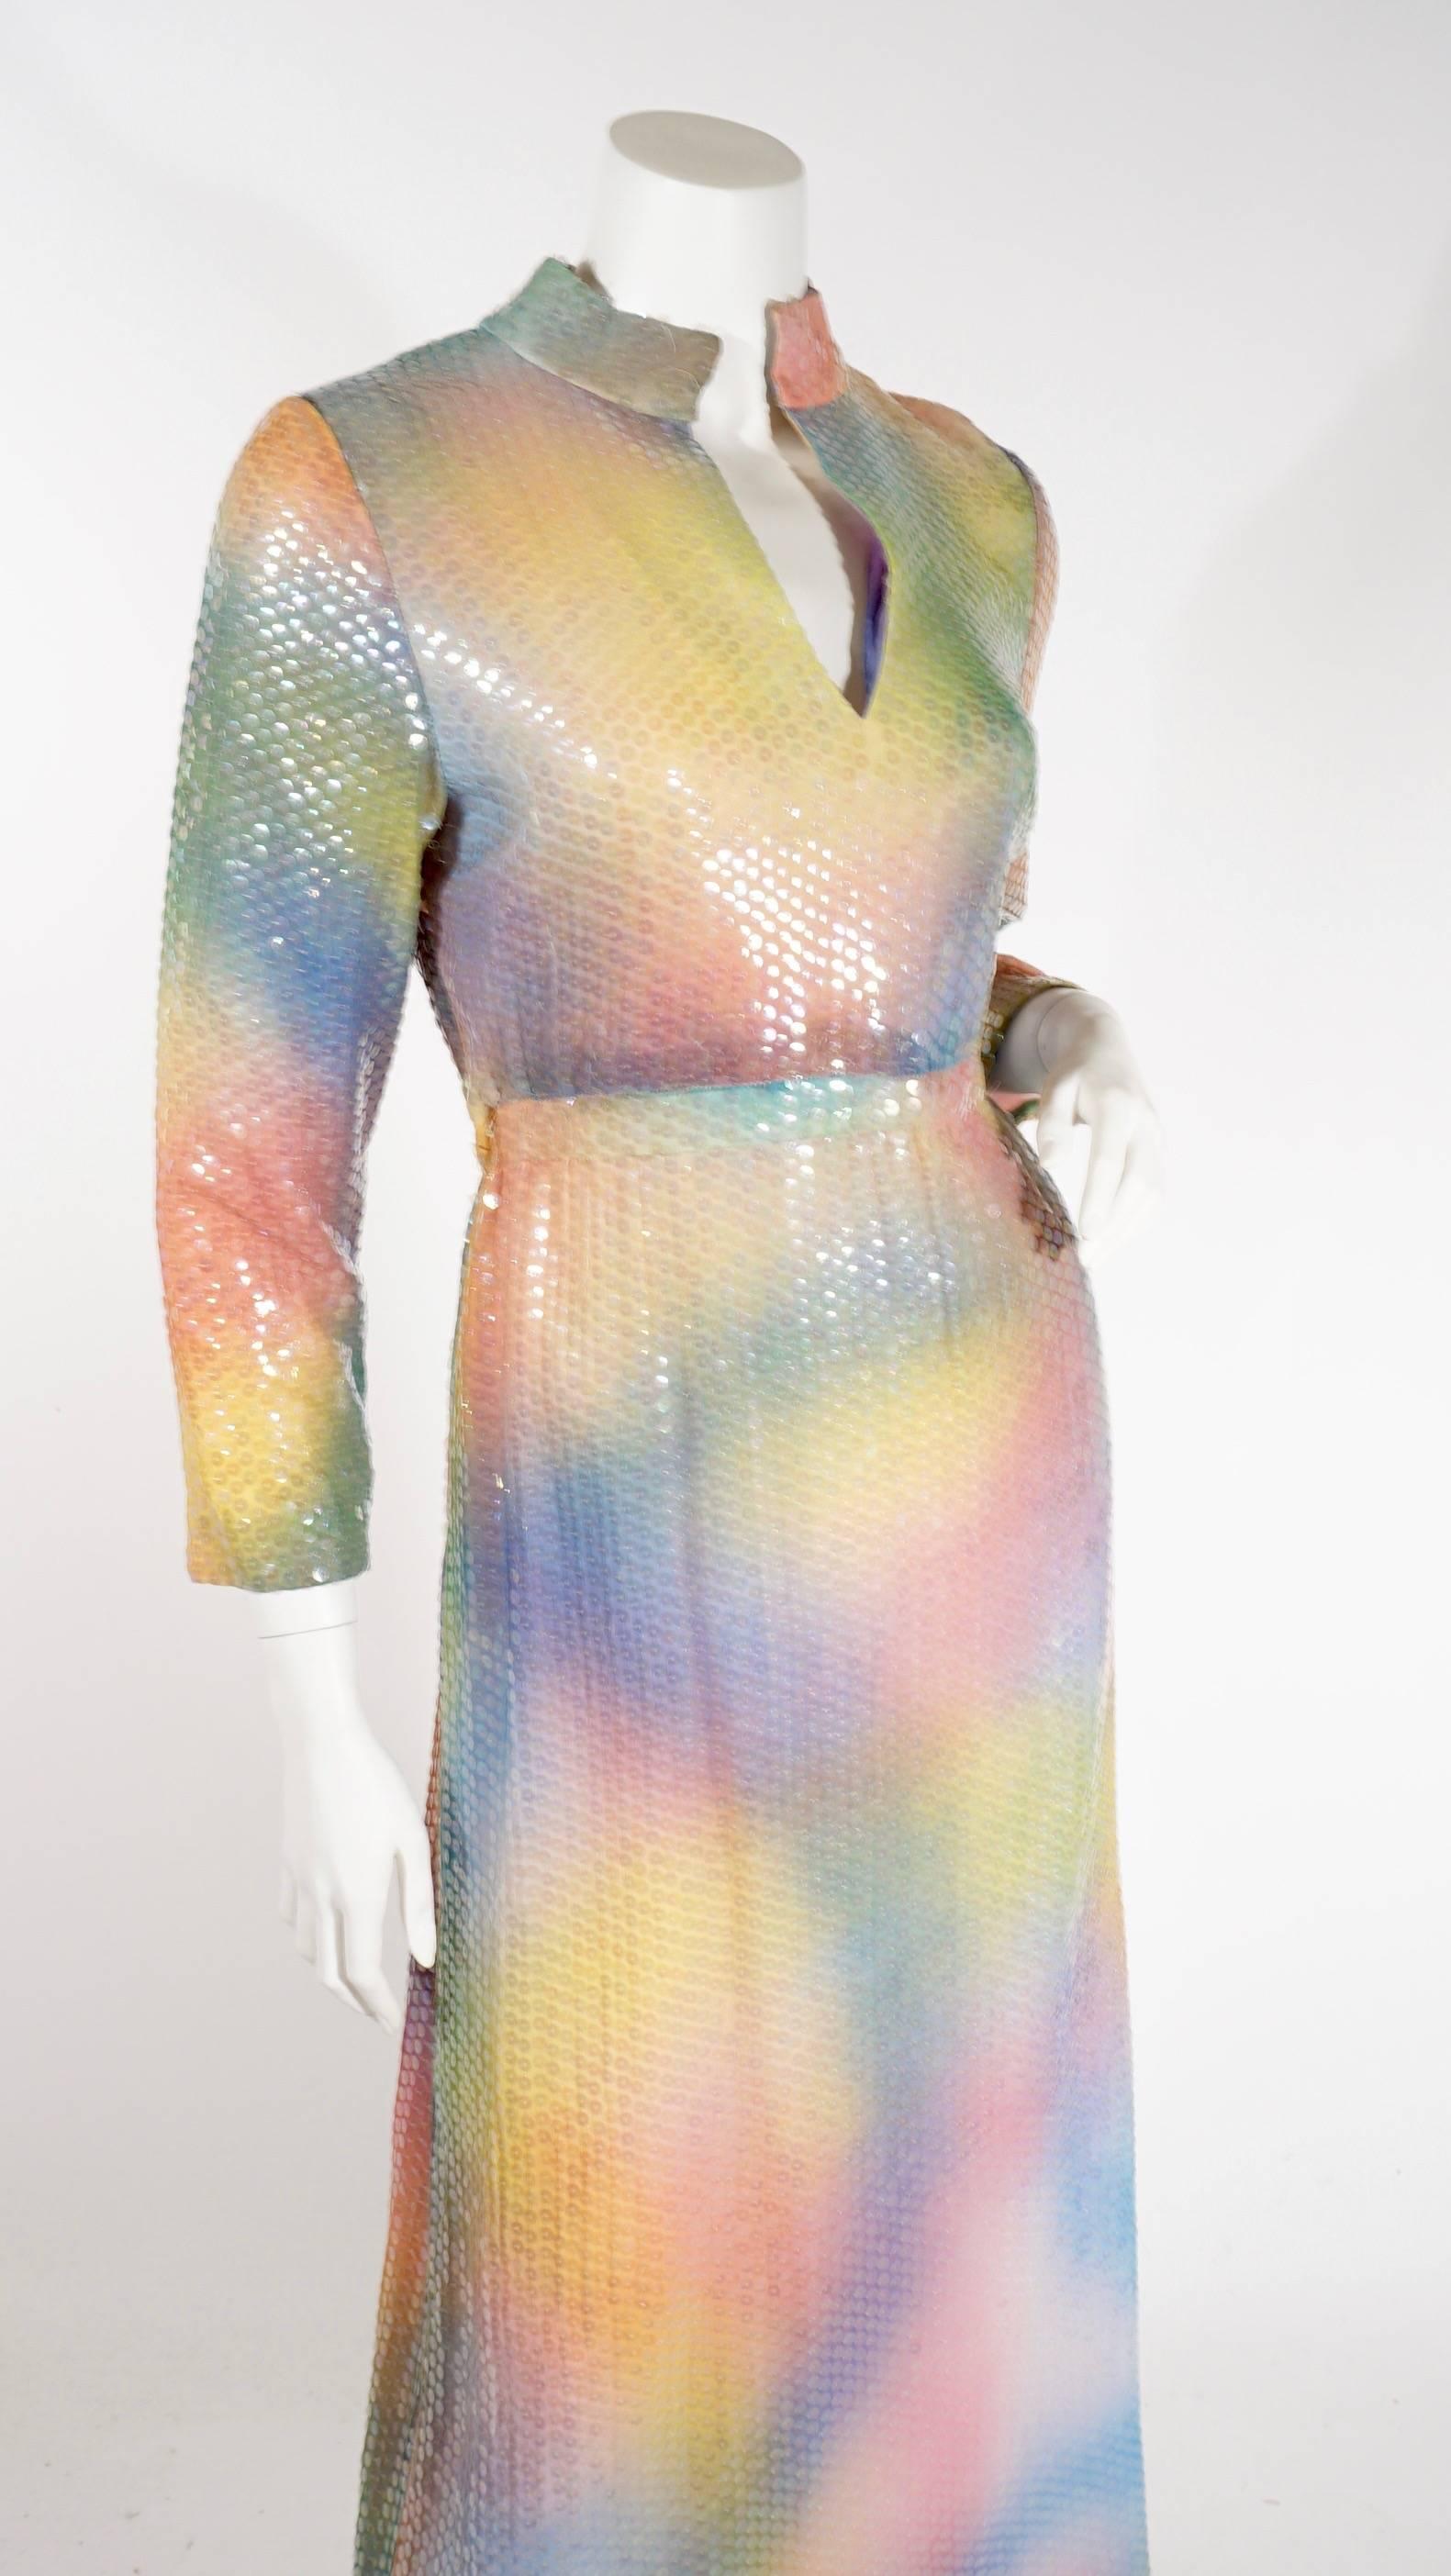 70s Elinor Simmons for Malcolm Starr full length dress. This incredible colorful dress features multi colored sequins, long sleeves, and empire waist. Fully lined, zip back. Excellent condition. Can be worn as is or shortened into a